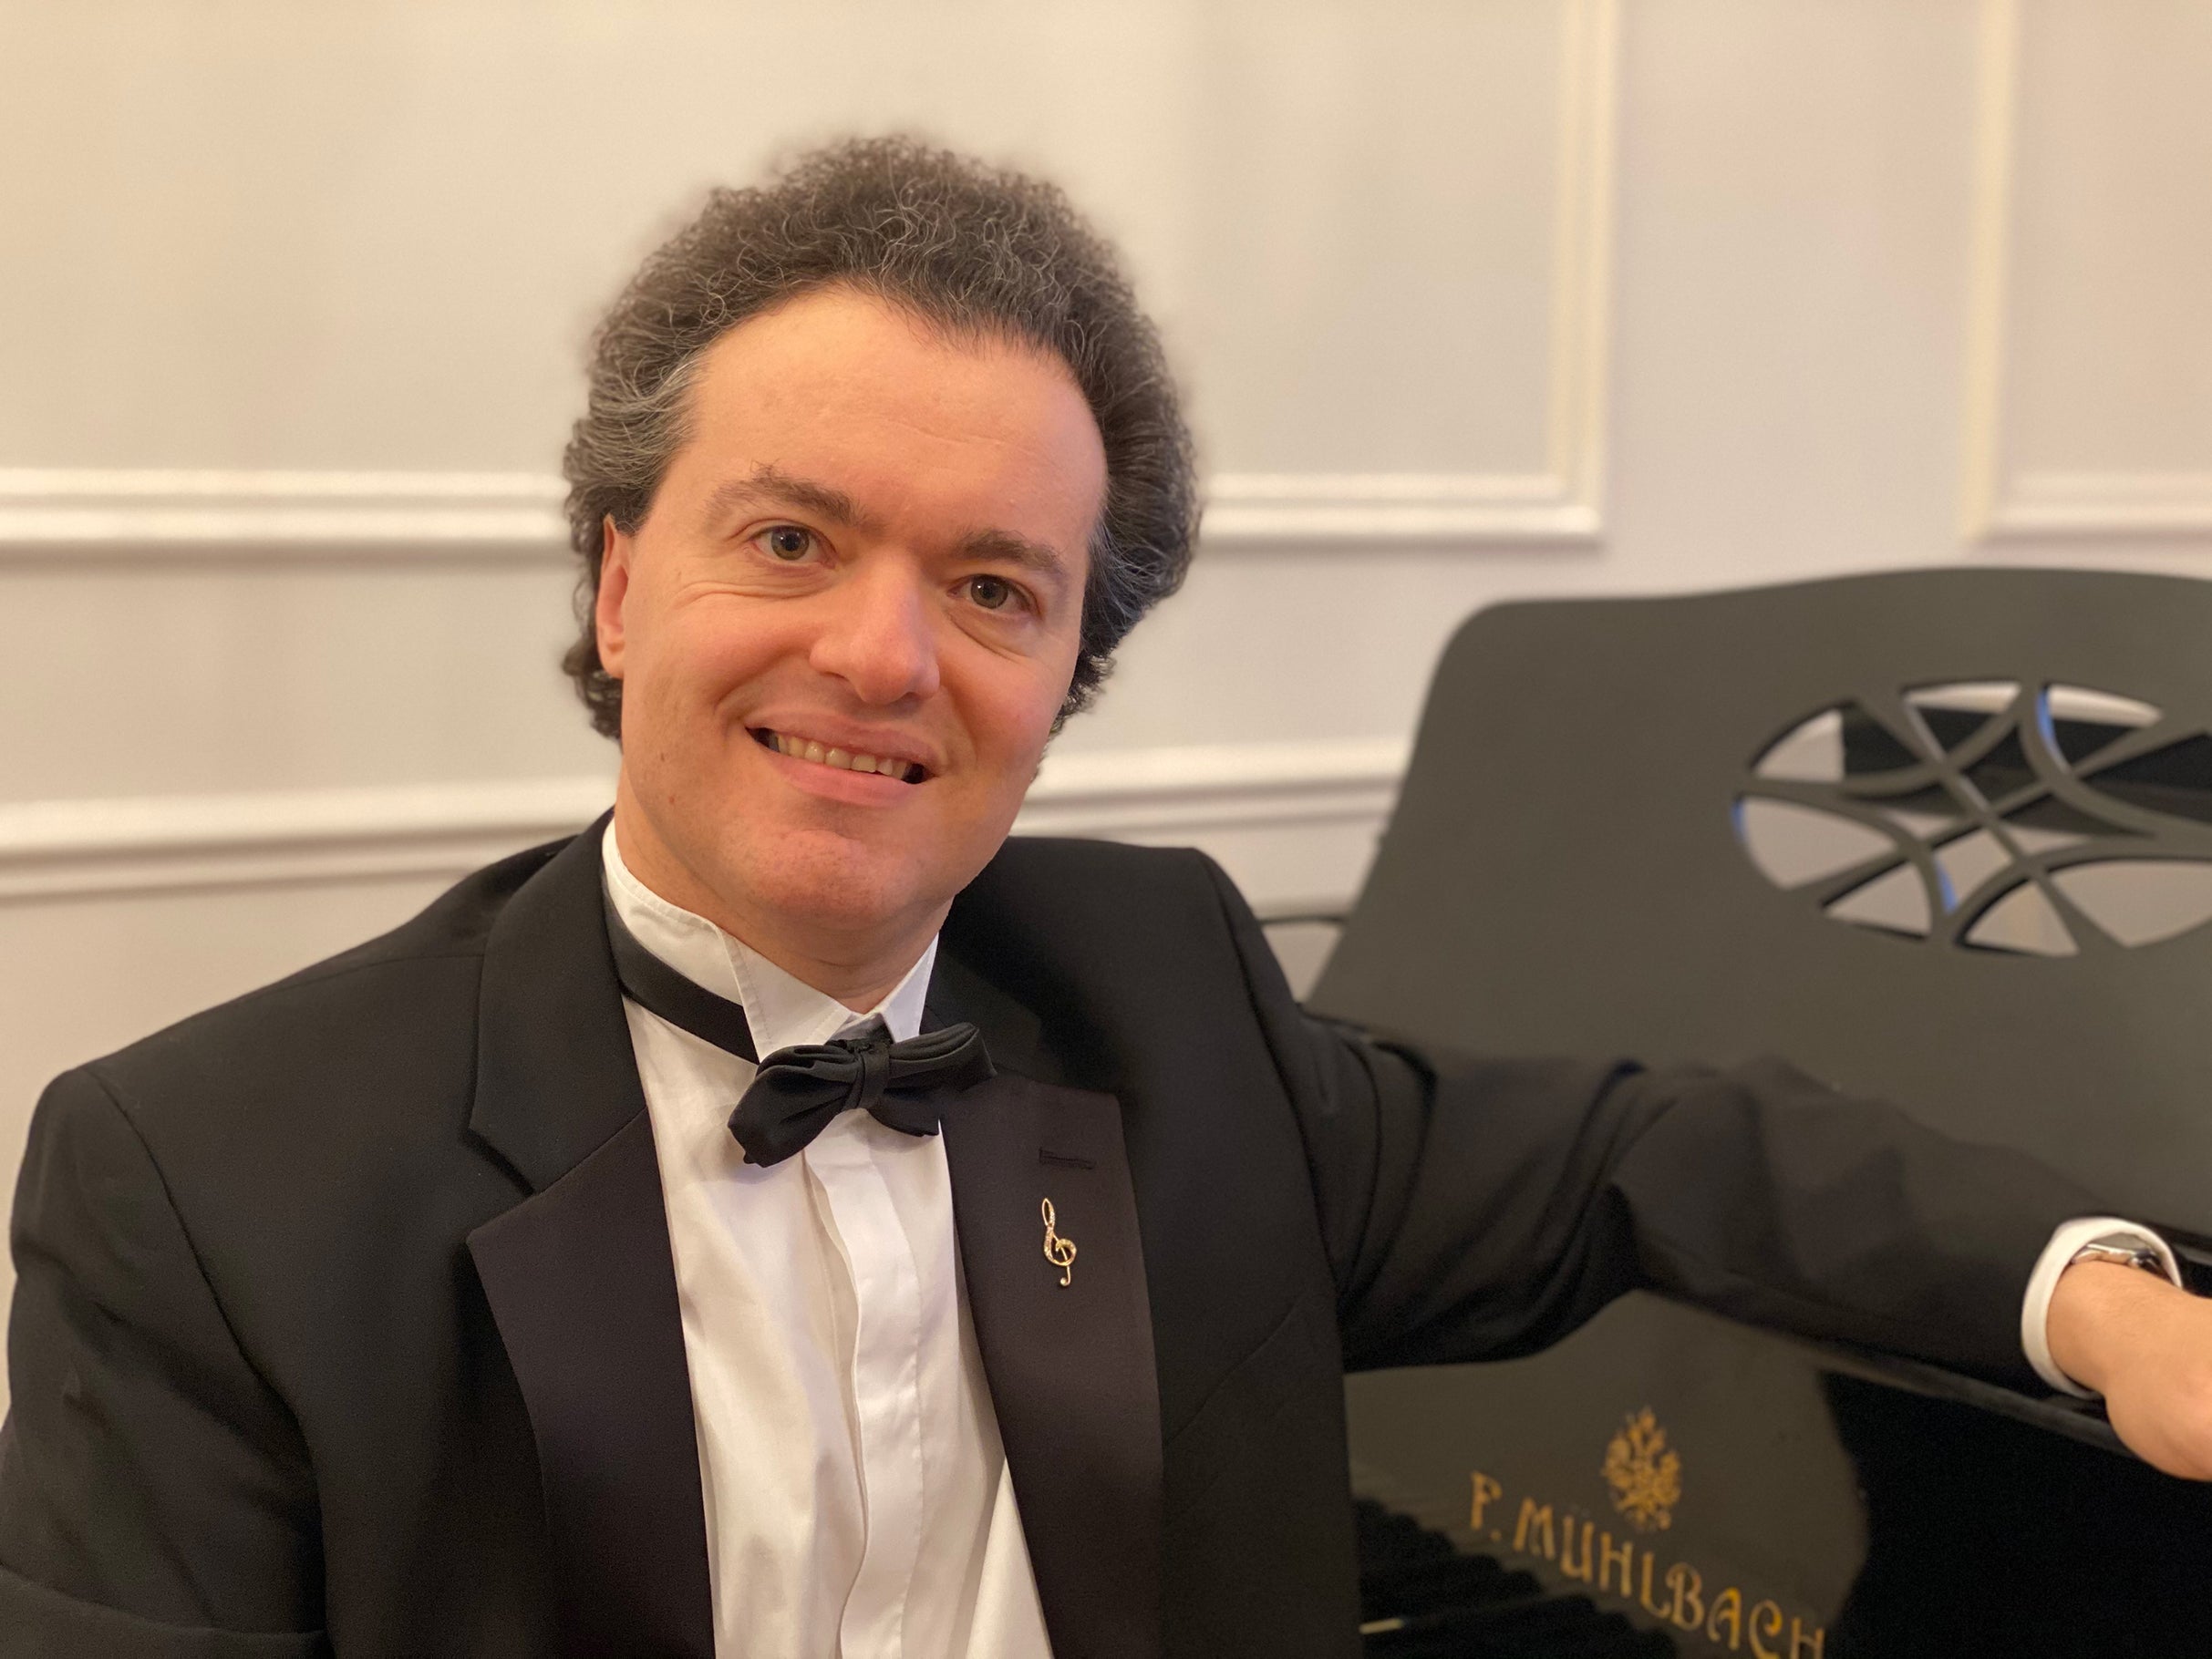 Evgeny Kissin at Kennedy Center - Concert Hall